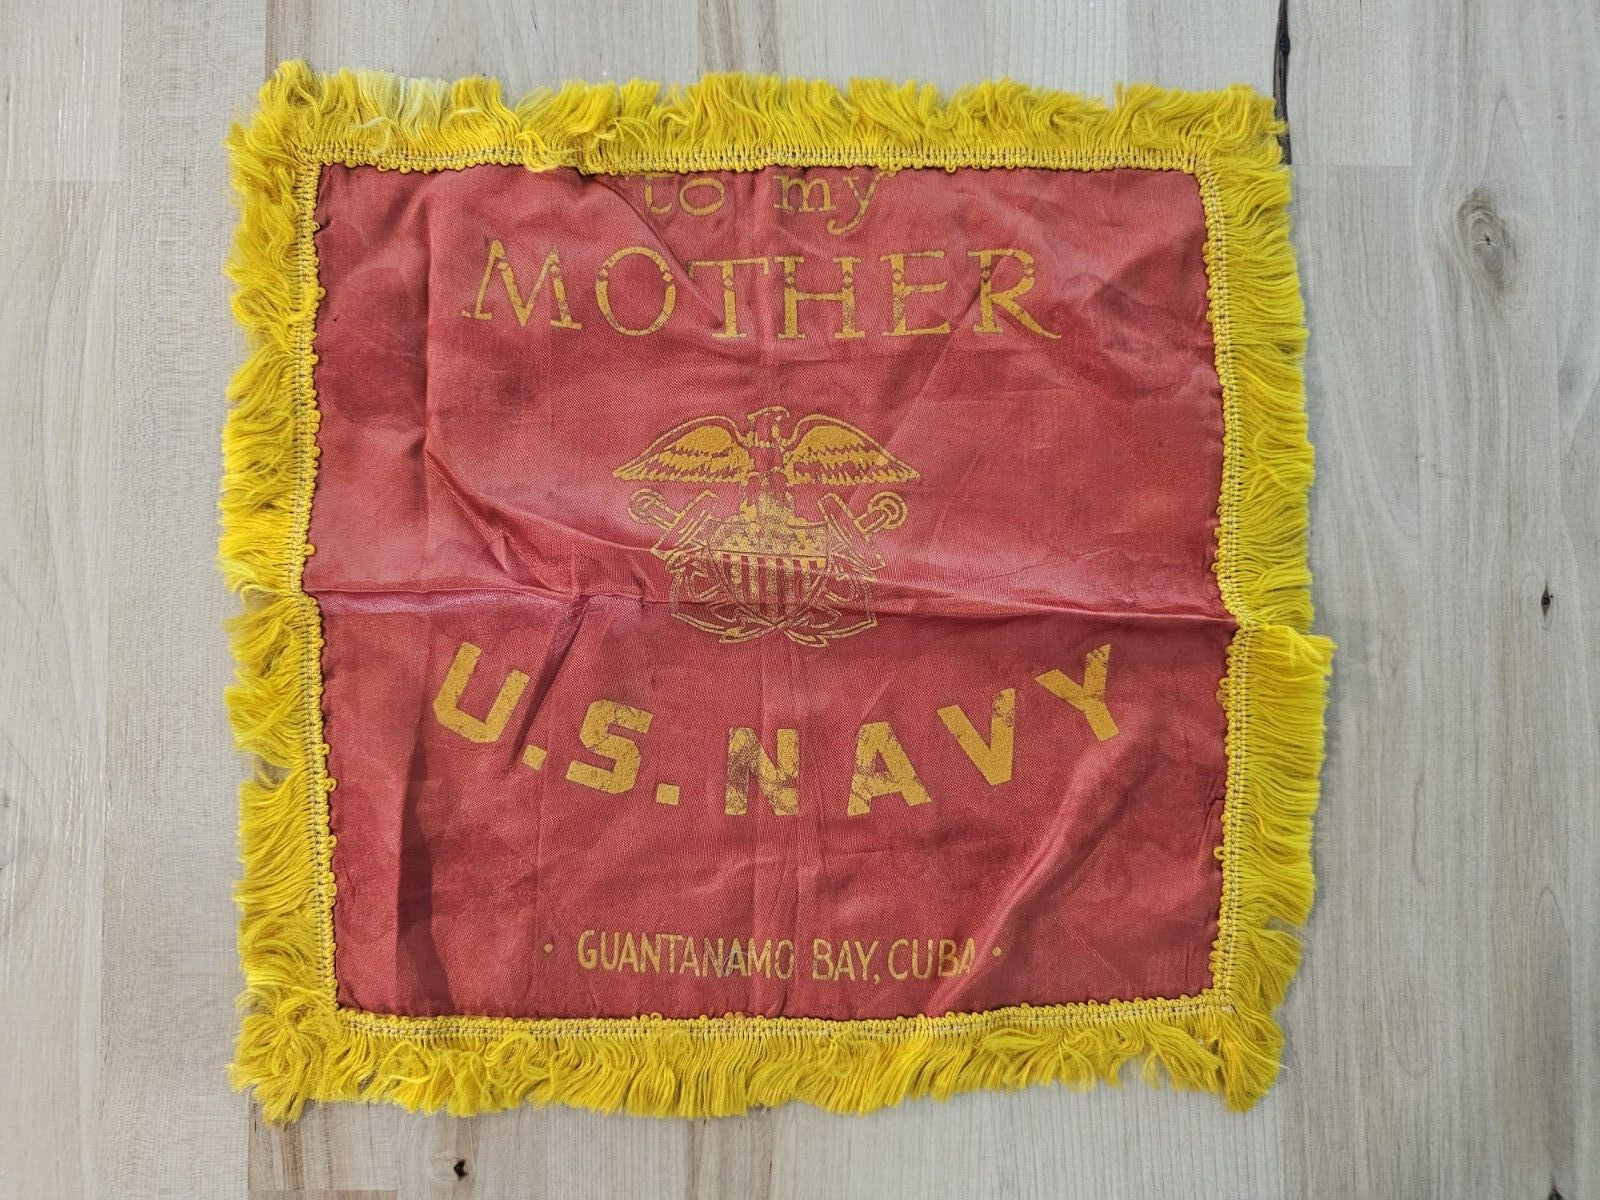 UNIQUE  1930s TO MY MOTHER US NAVY GUANTANAMO BAY EAGLE SHIELD FLAG PENNANT